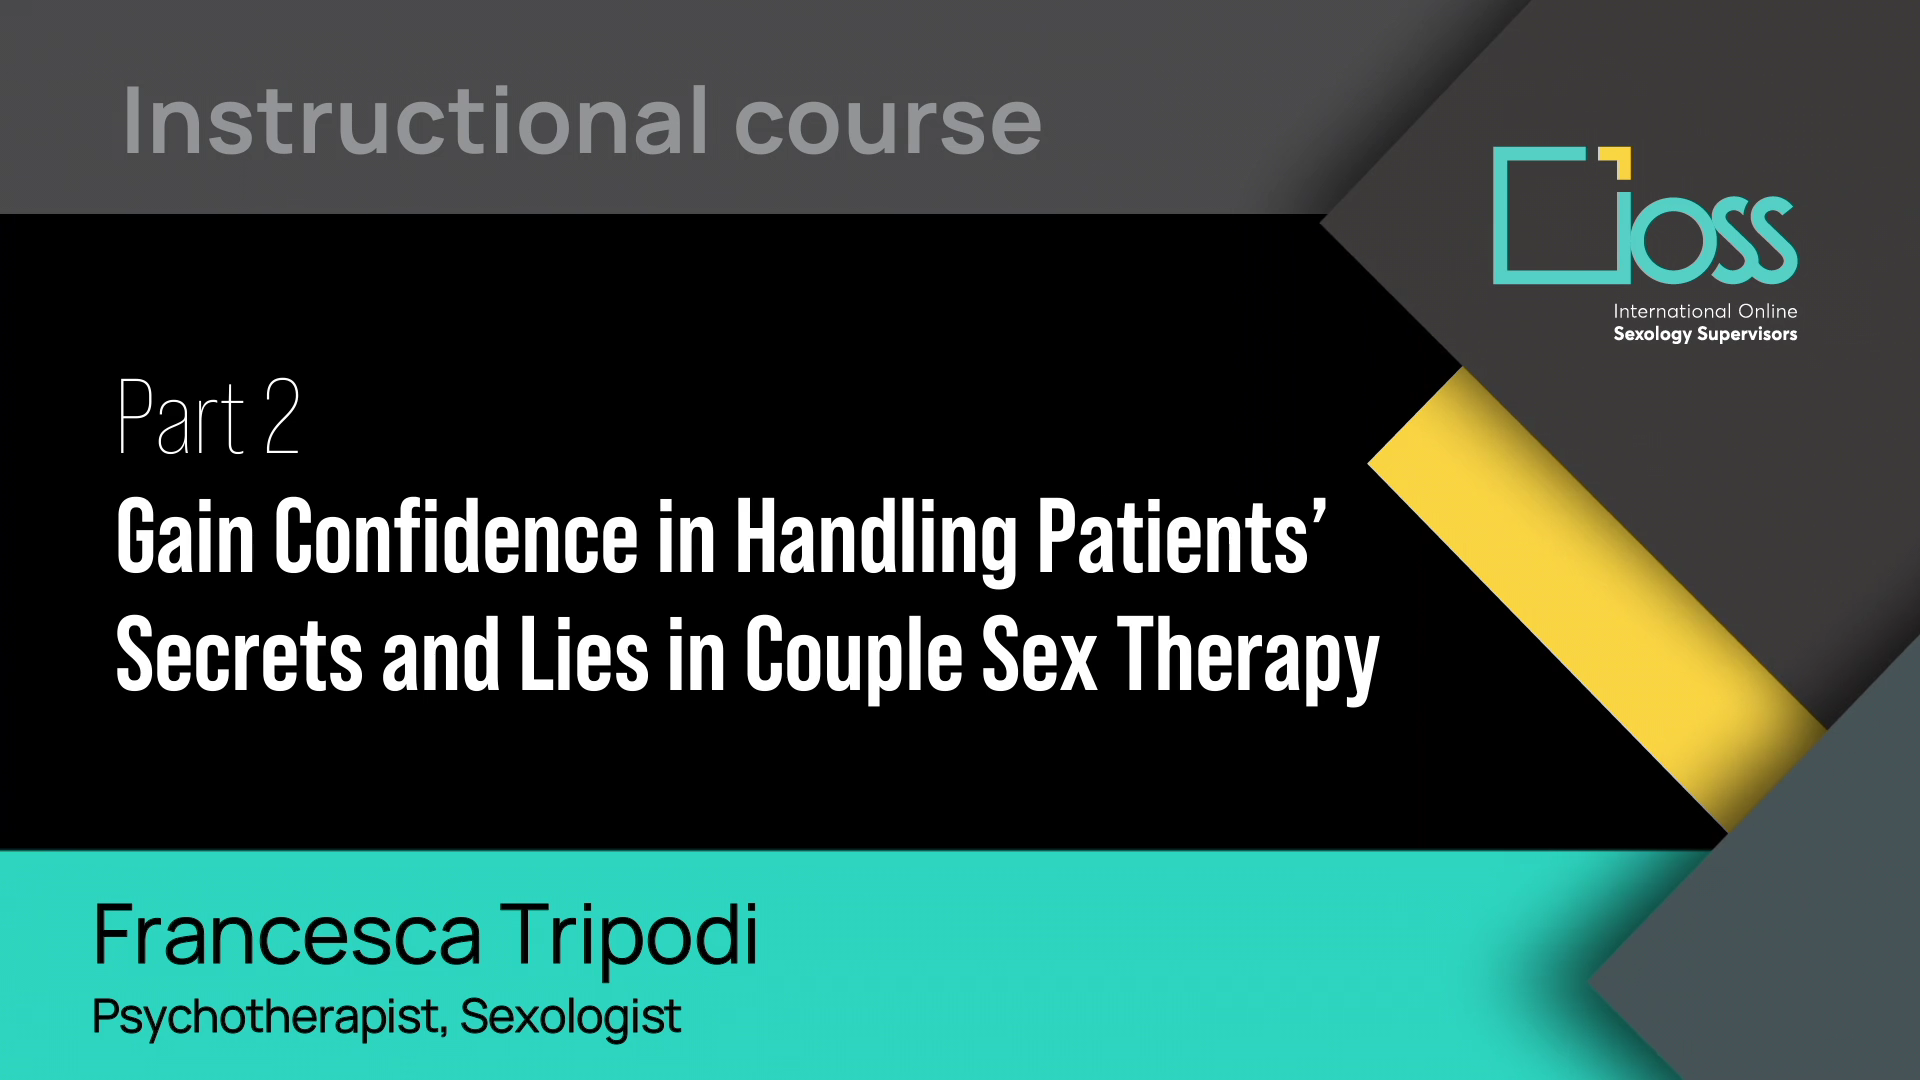 Part 2 Gain Confidence in Handling patients’ Secrets and Lies in Couple Sex Therapy (Part 1 & 2)